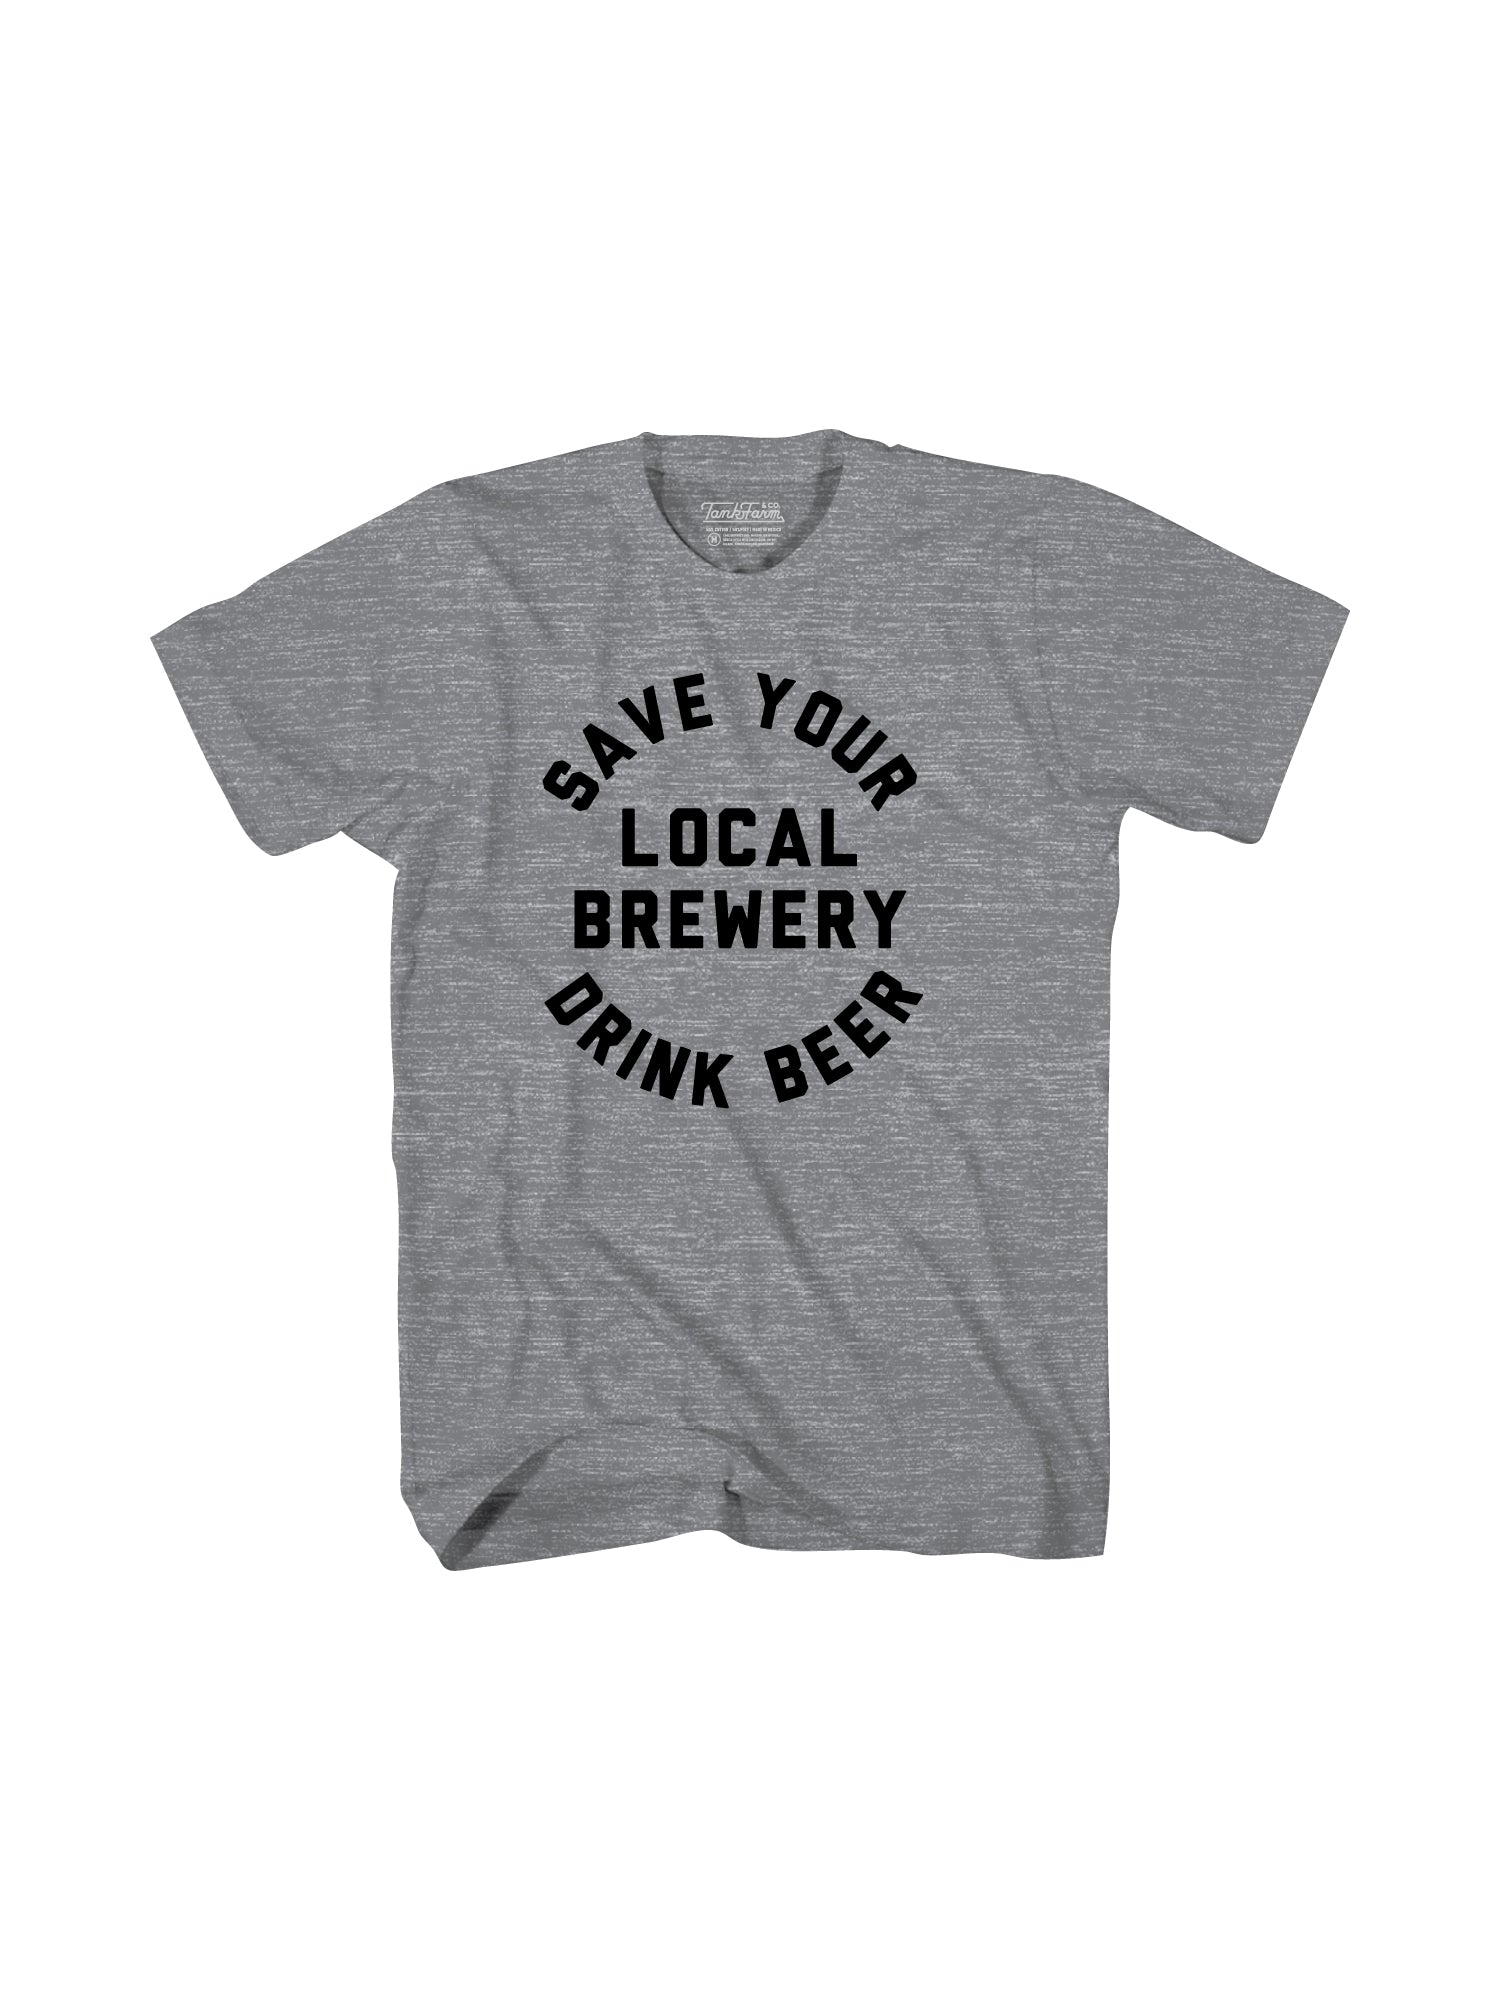 SAVE YOUR LOCAL BREWRY - V. SNOW